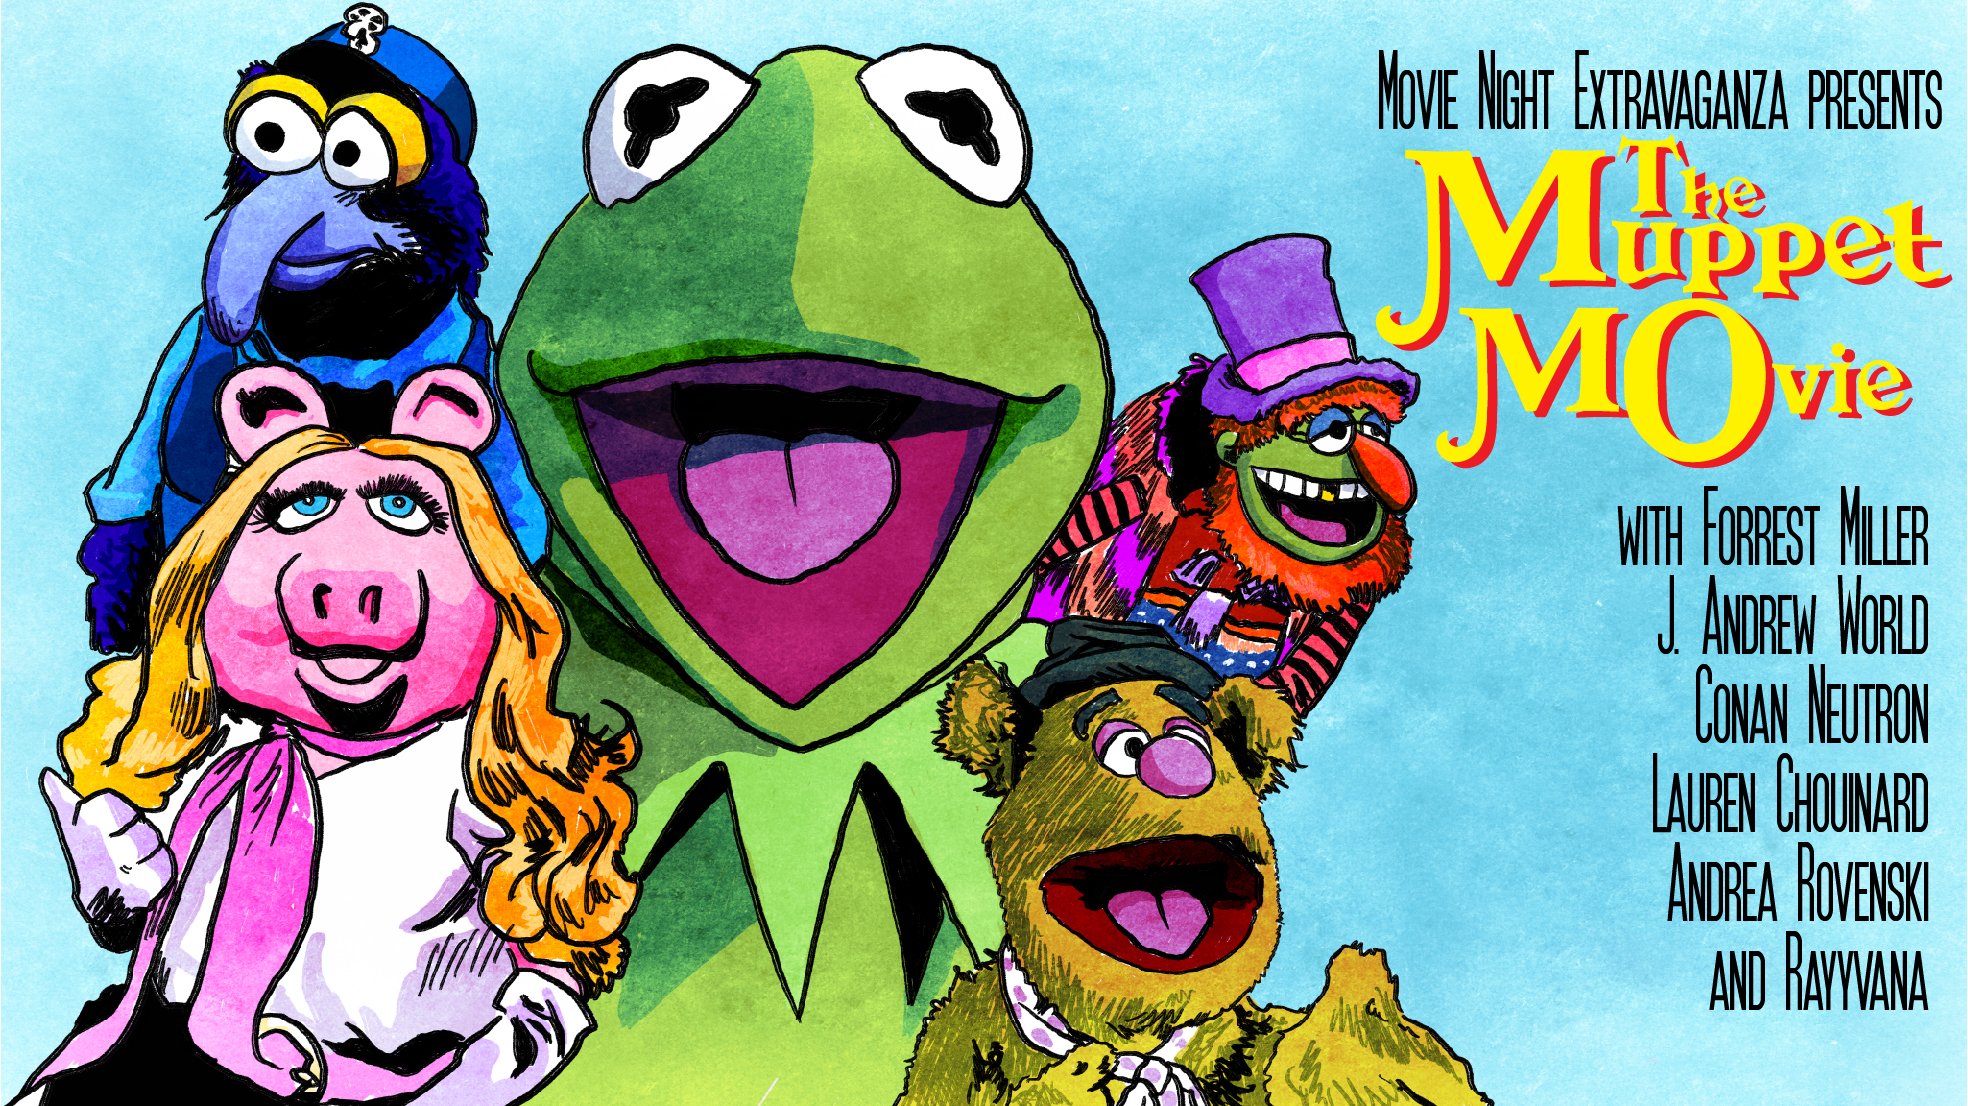 Episode 82: The Muppet Movie with Andrea Rovenski and Rayyvana